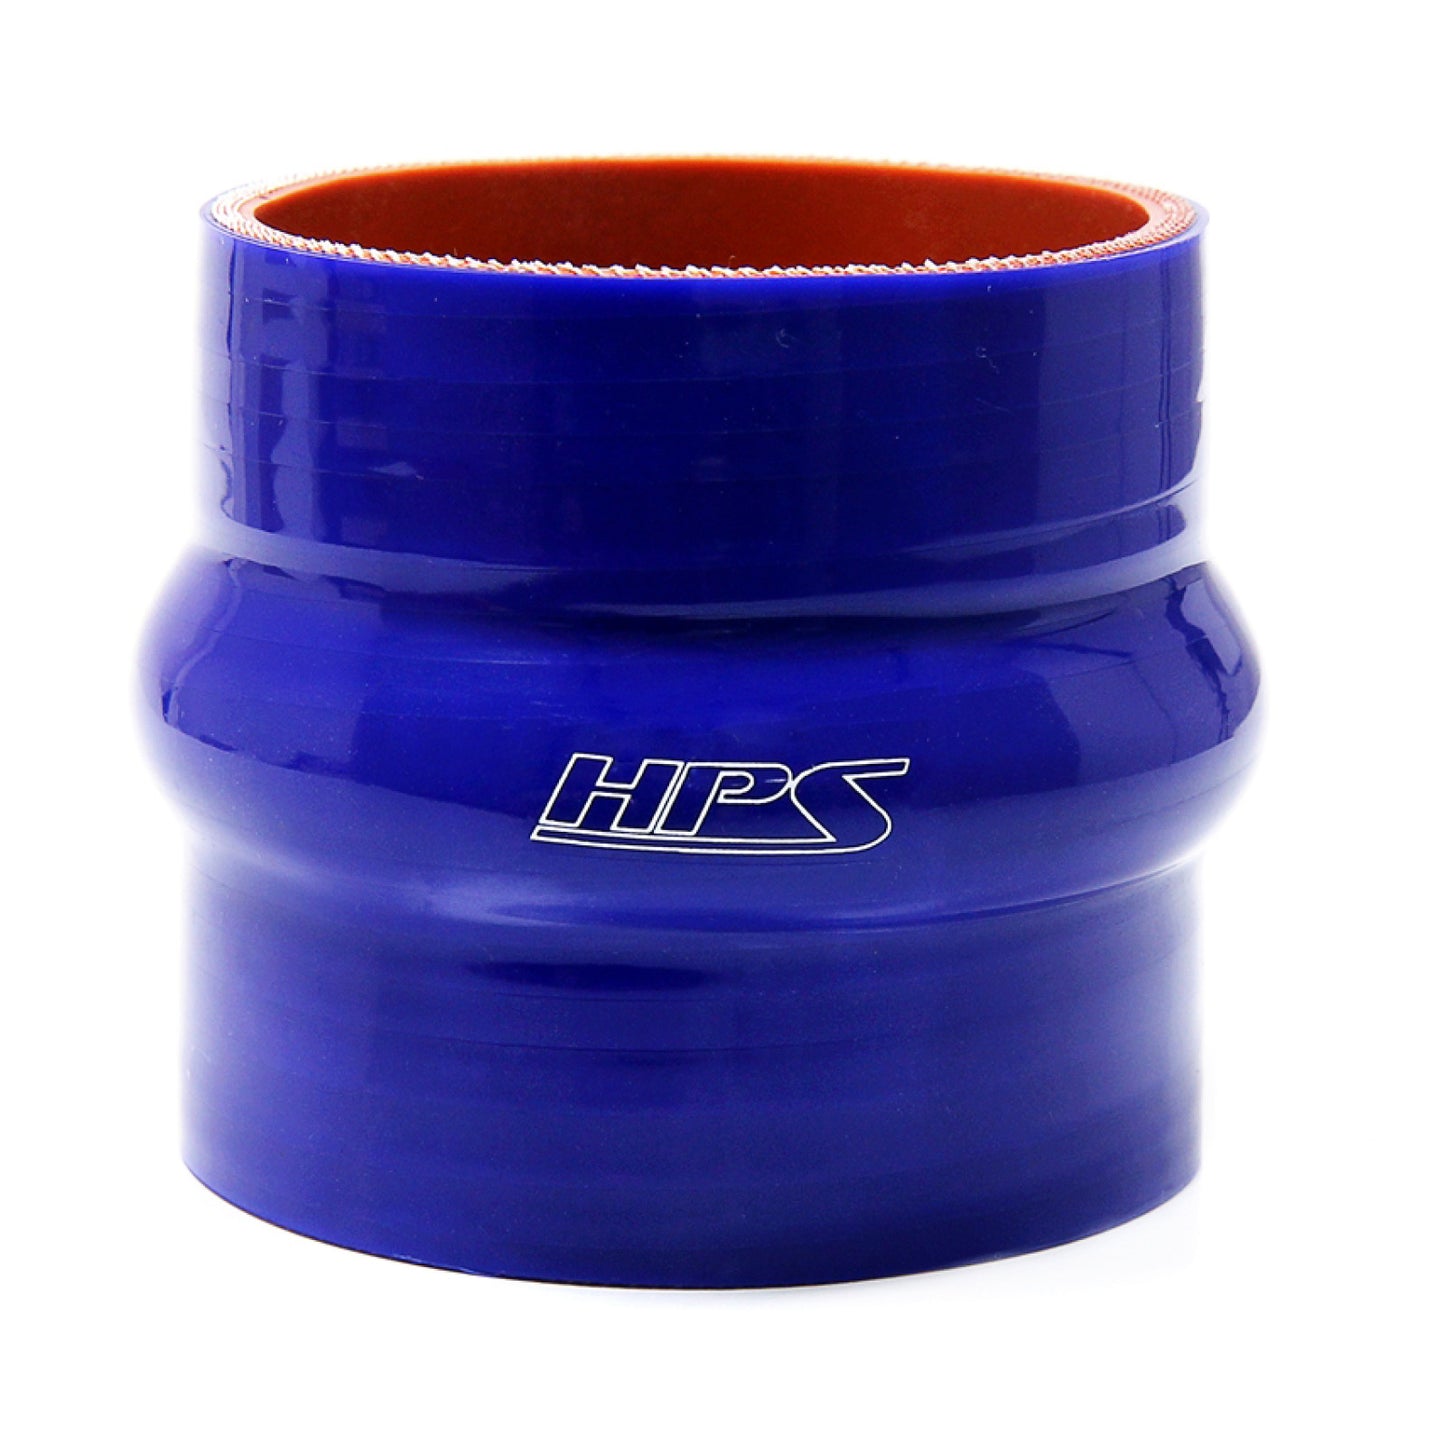 HPS 4.25" ID , 4" Long High Temp 4-ply Reinforced Silicone Hump Coupler Hose Blue (108mm ID , 102mm Length)